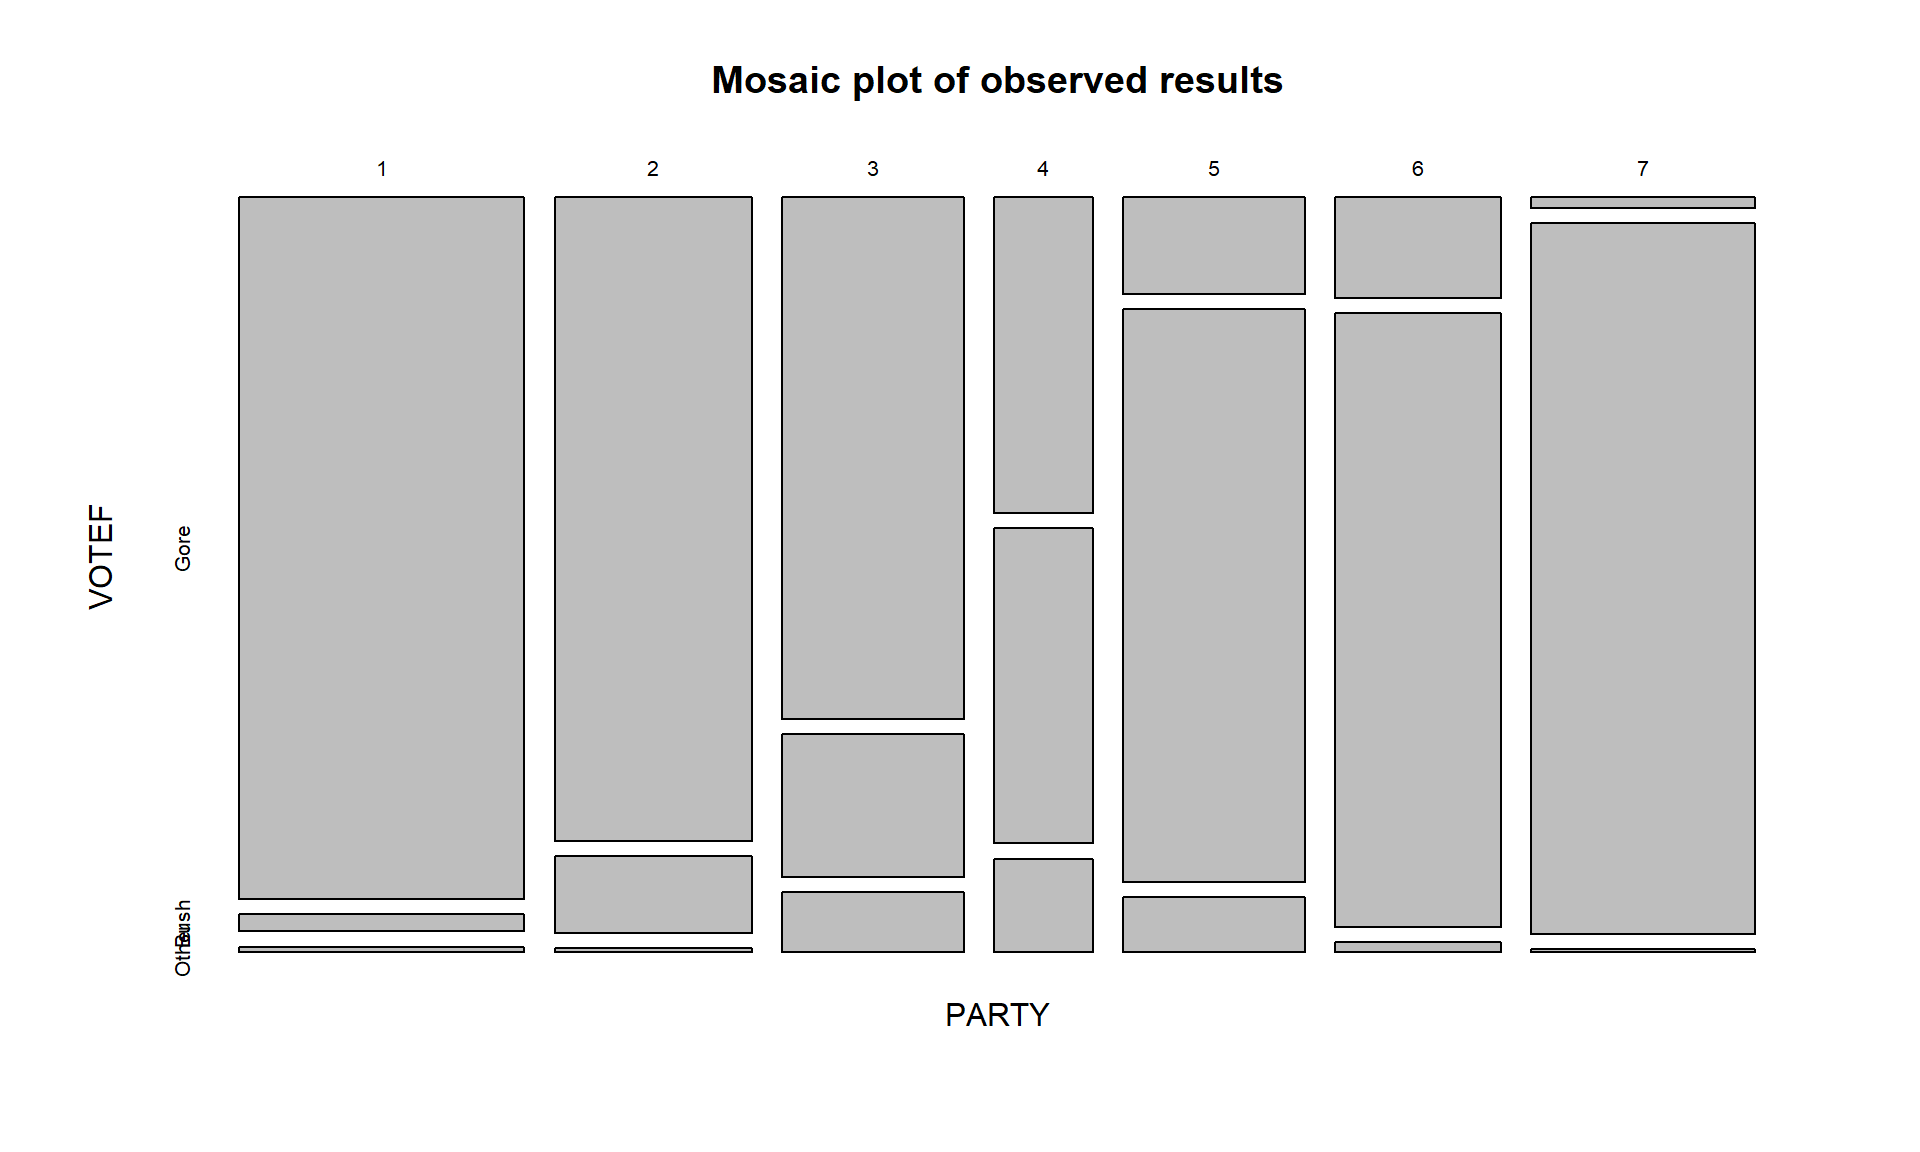 Mosaic plot of the 2000 election data comparing party affiliation and voting results.